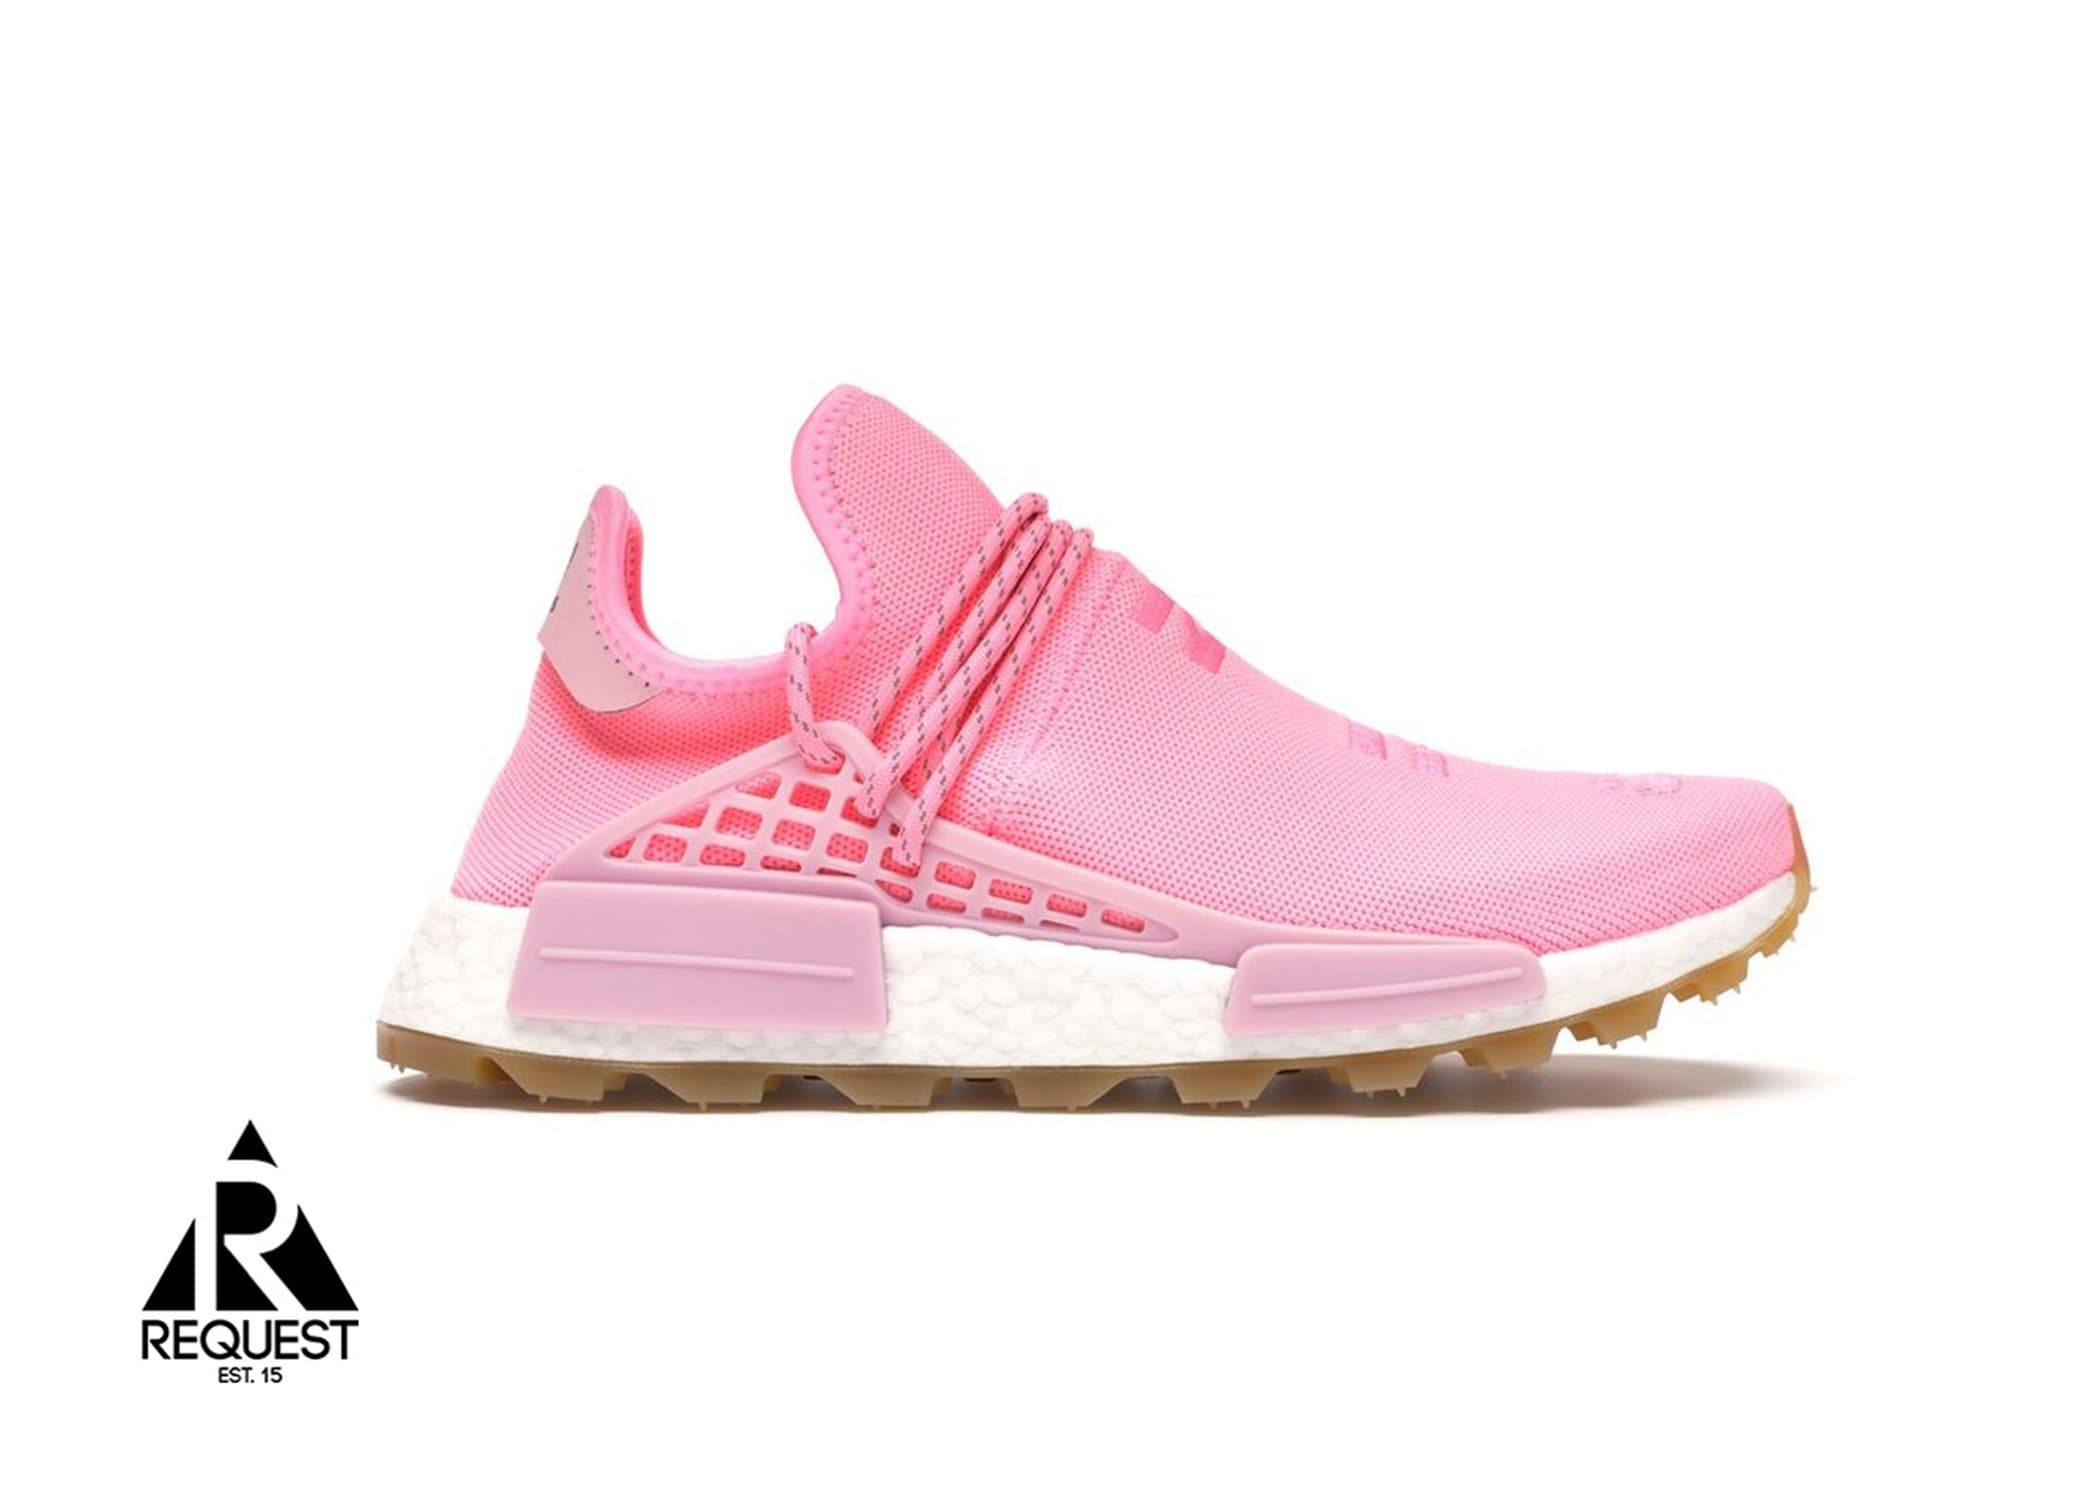 Adidas Human Race “Now Is Her Time Pink"